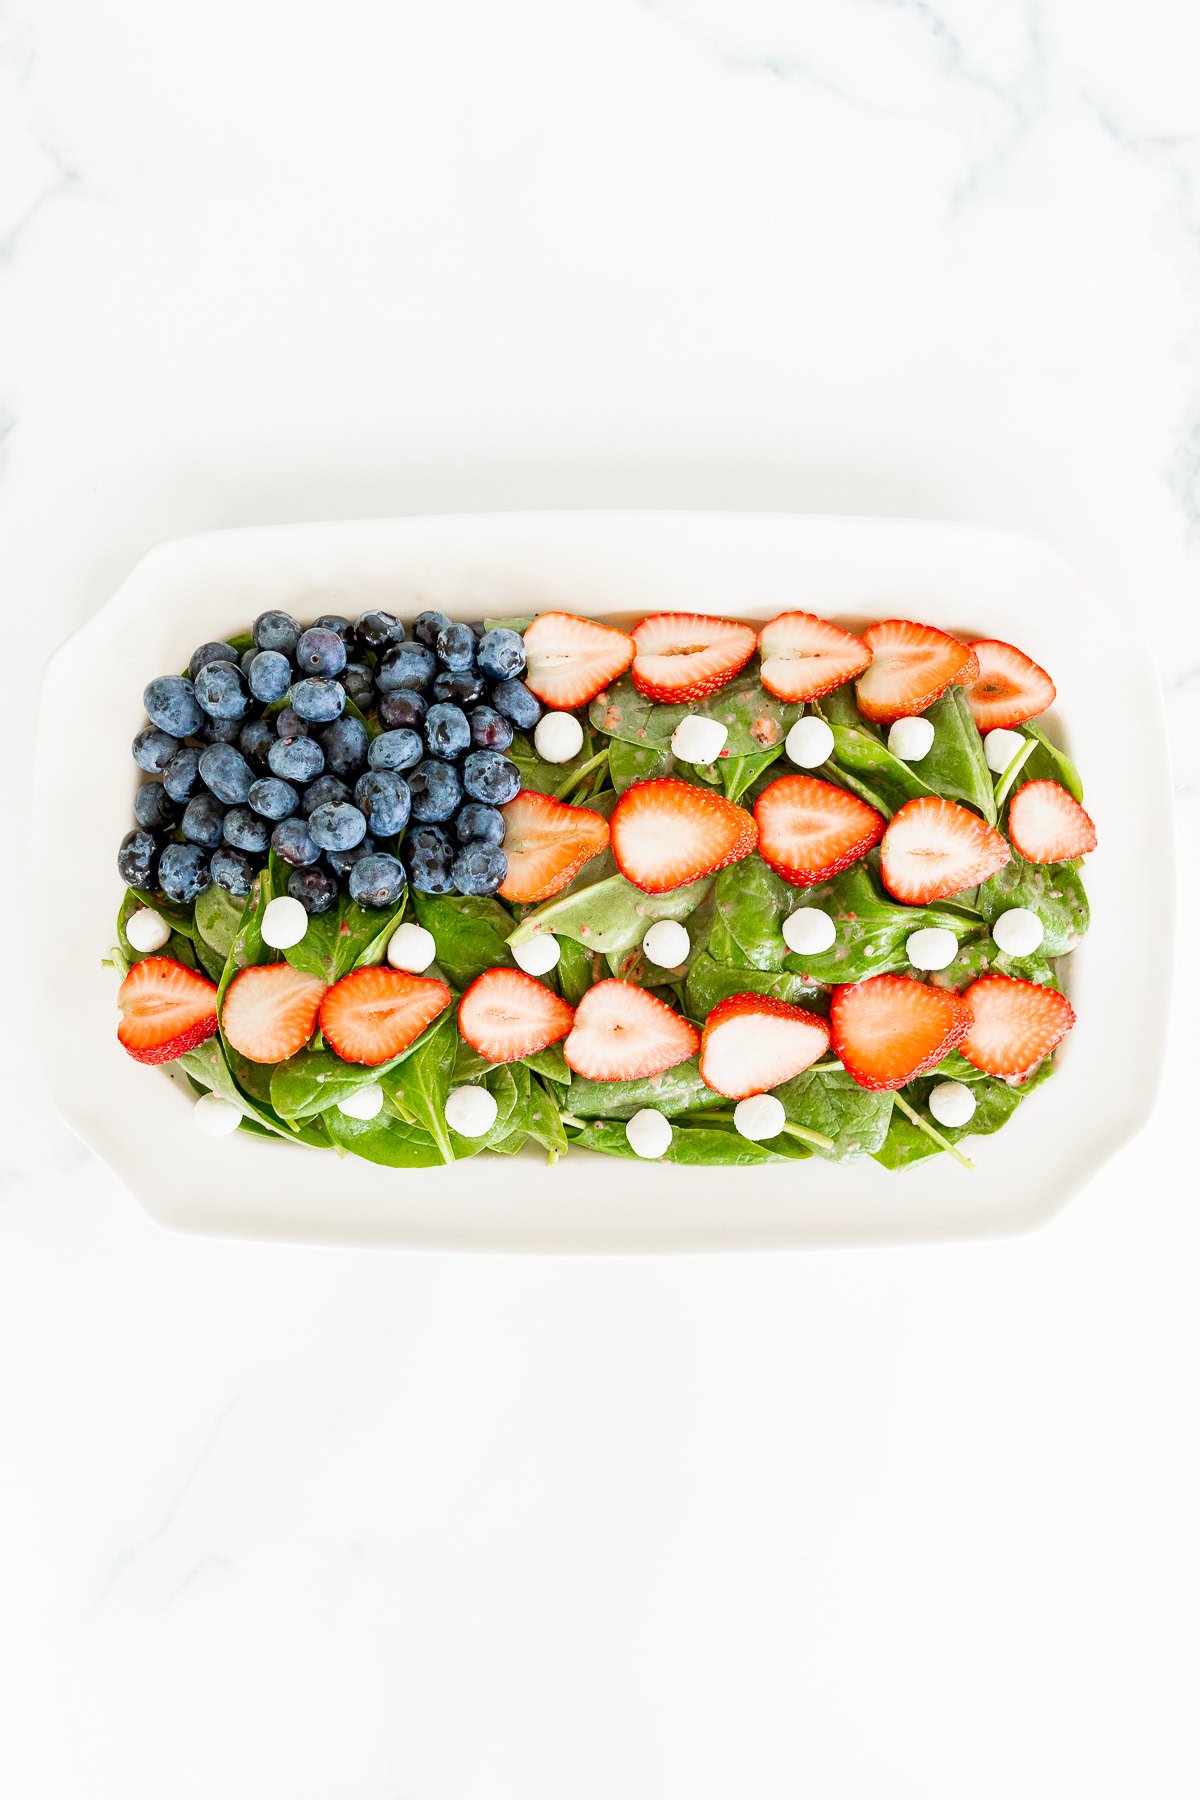 A rectangular platter with a red, white, and blue salad consisting of spinach topped with sliced strawberries, whole blueberries, and small white cheese pieces.